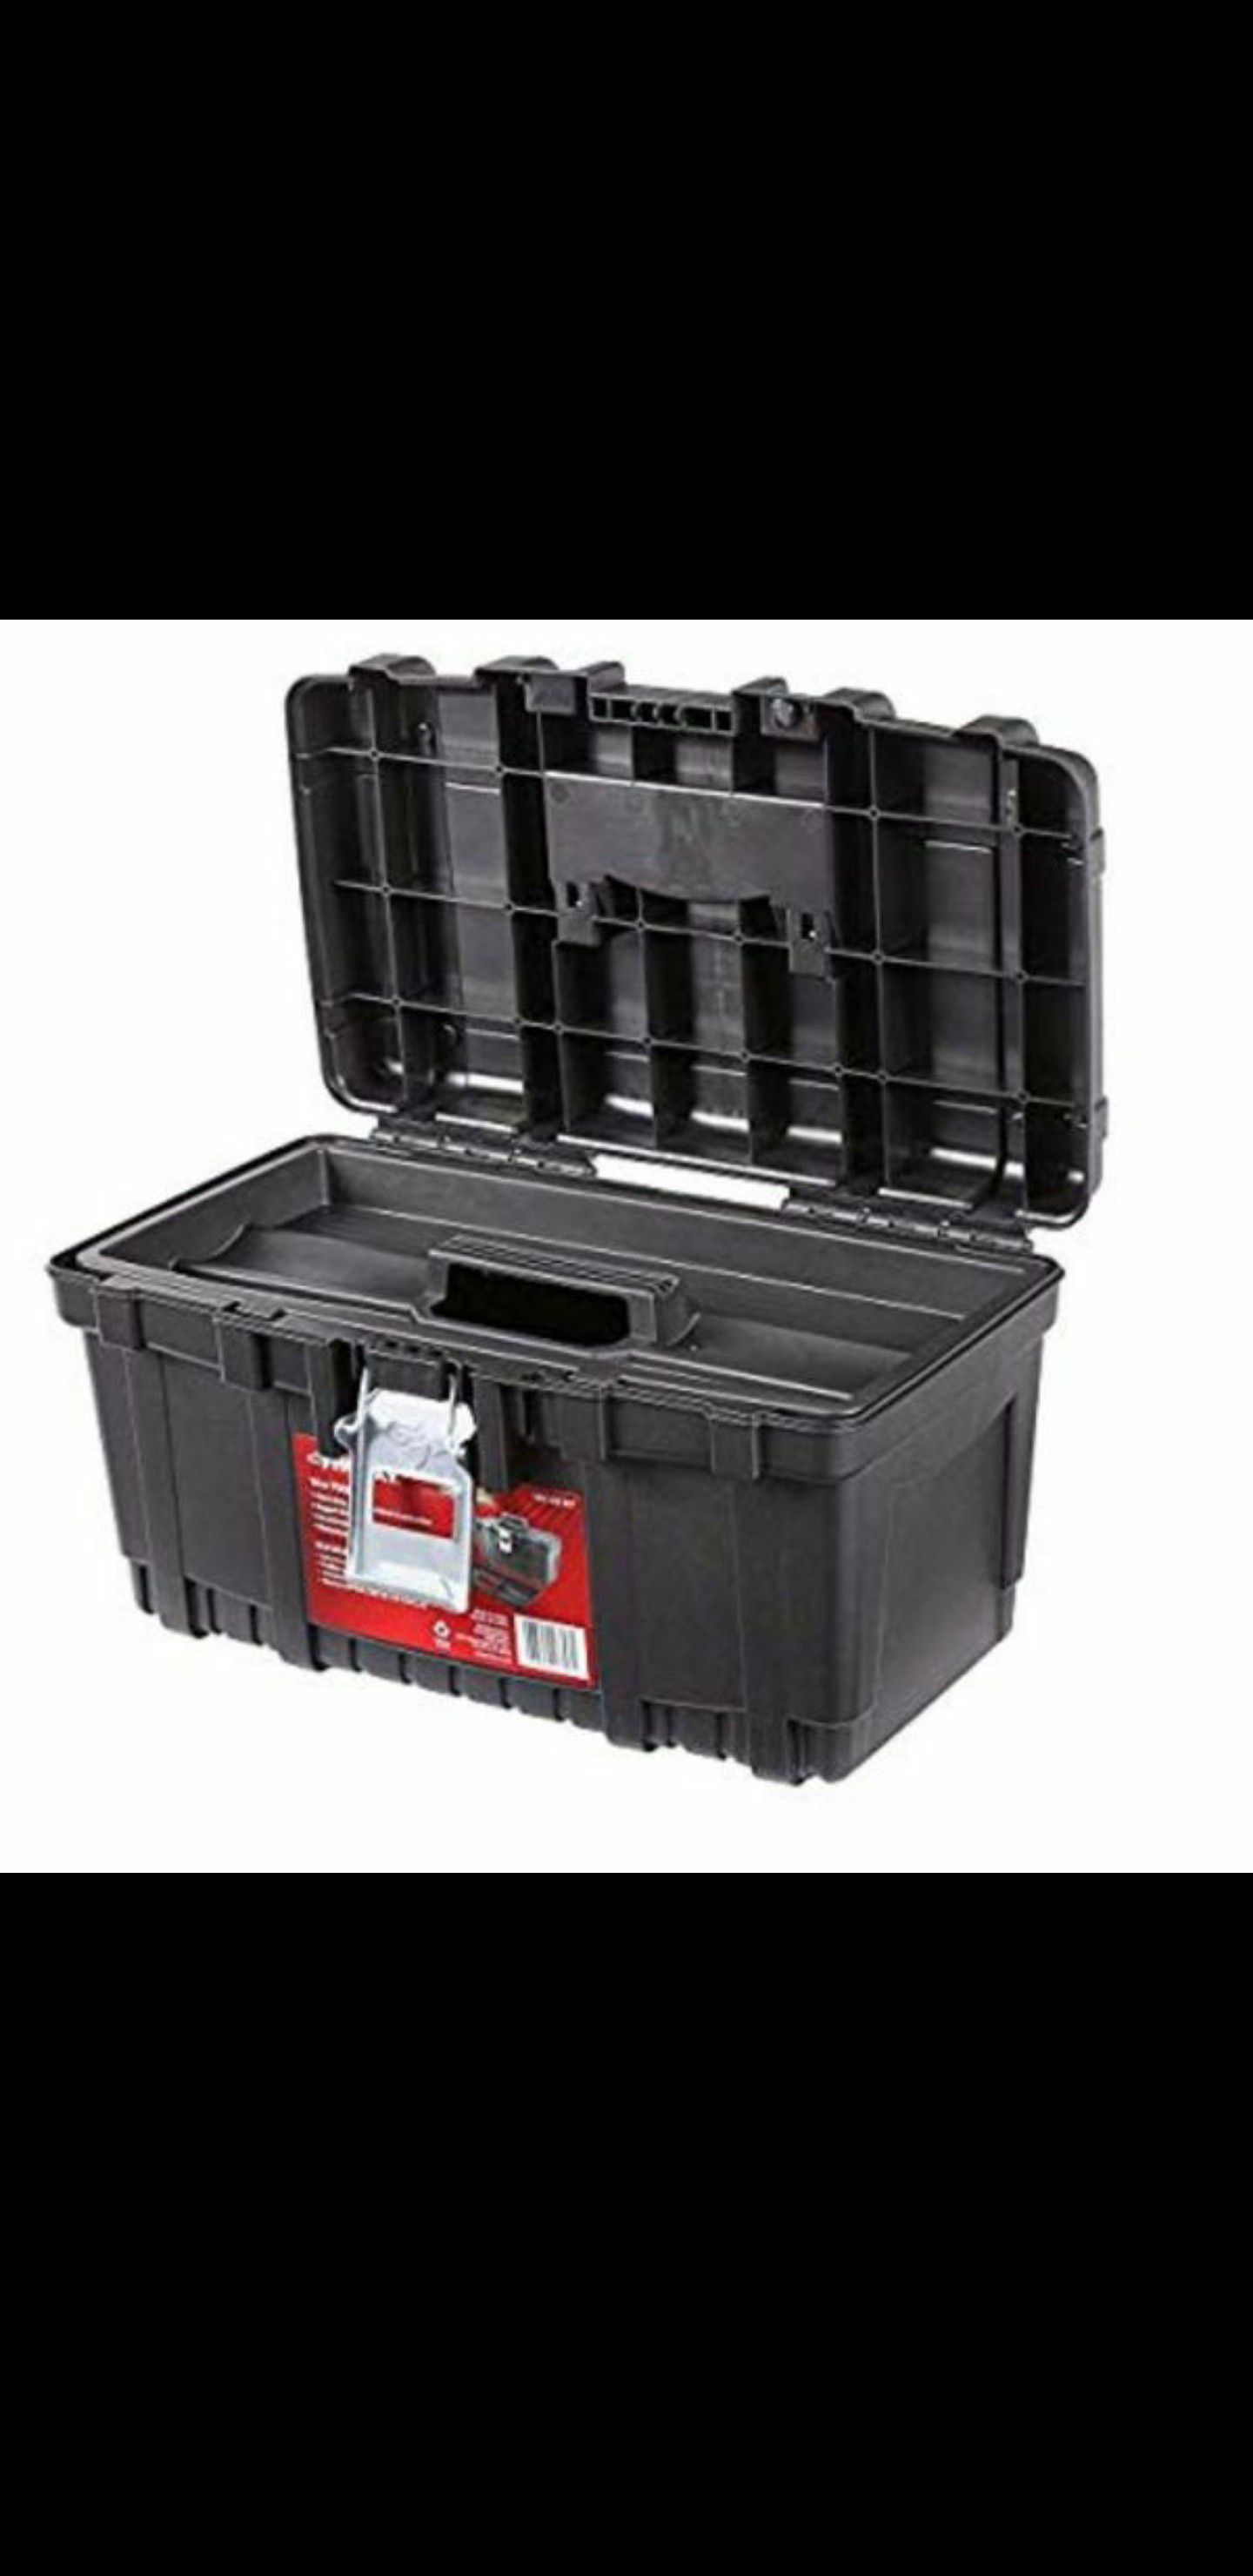 SMALL New Husky 16" Plastic Tool Box with Rugged Metal Latch & Ample Storage Capabilities in Black (Pick up only)